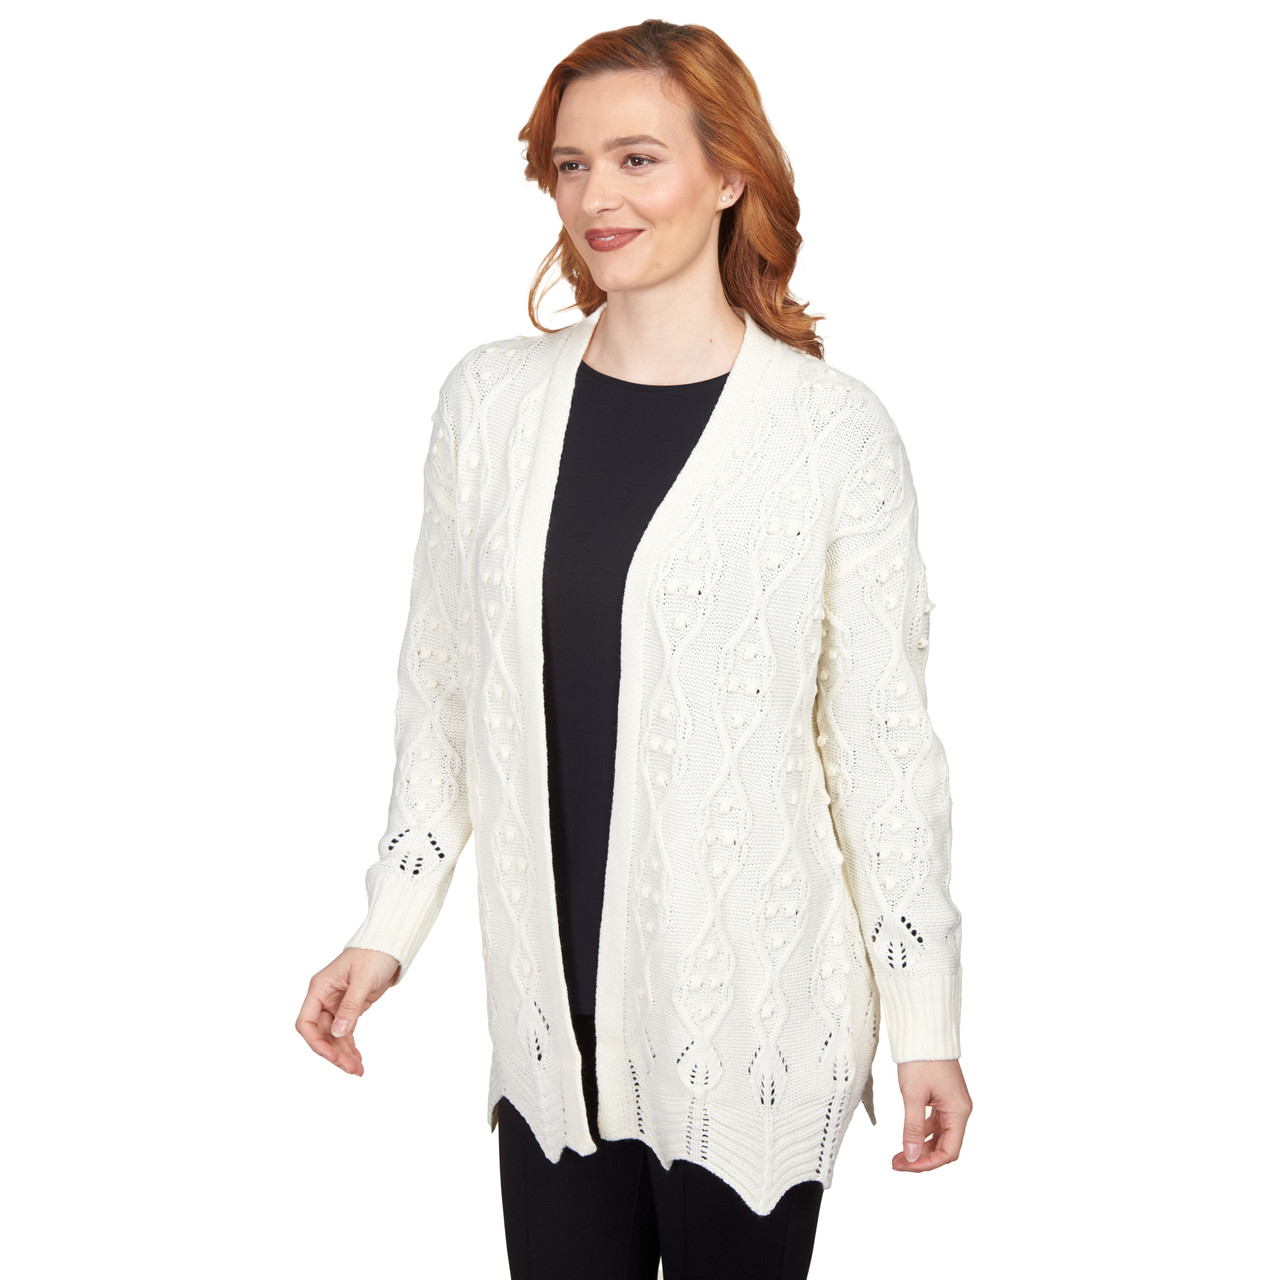 Ivory and Brown Palm Print Mid Length Cardigan - S